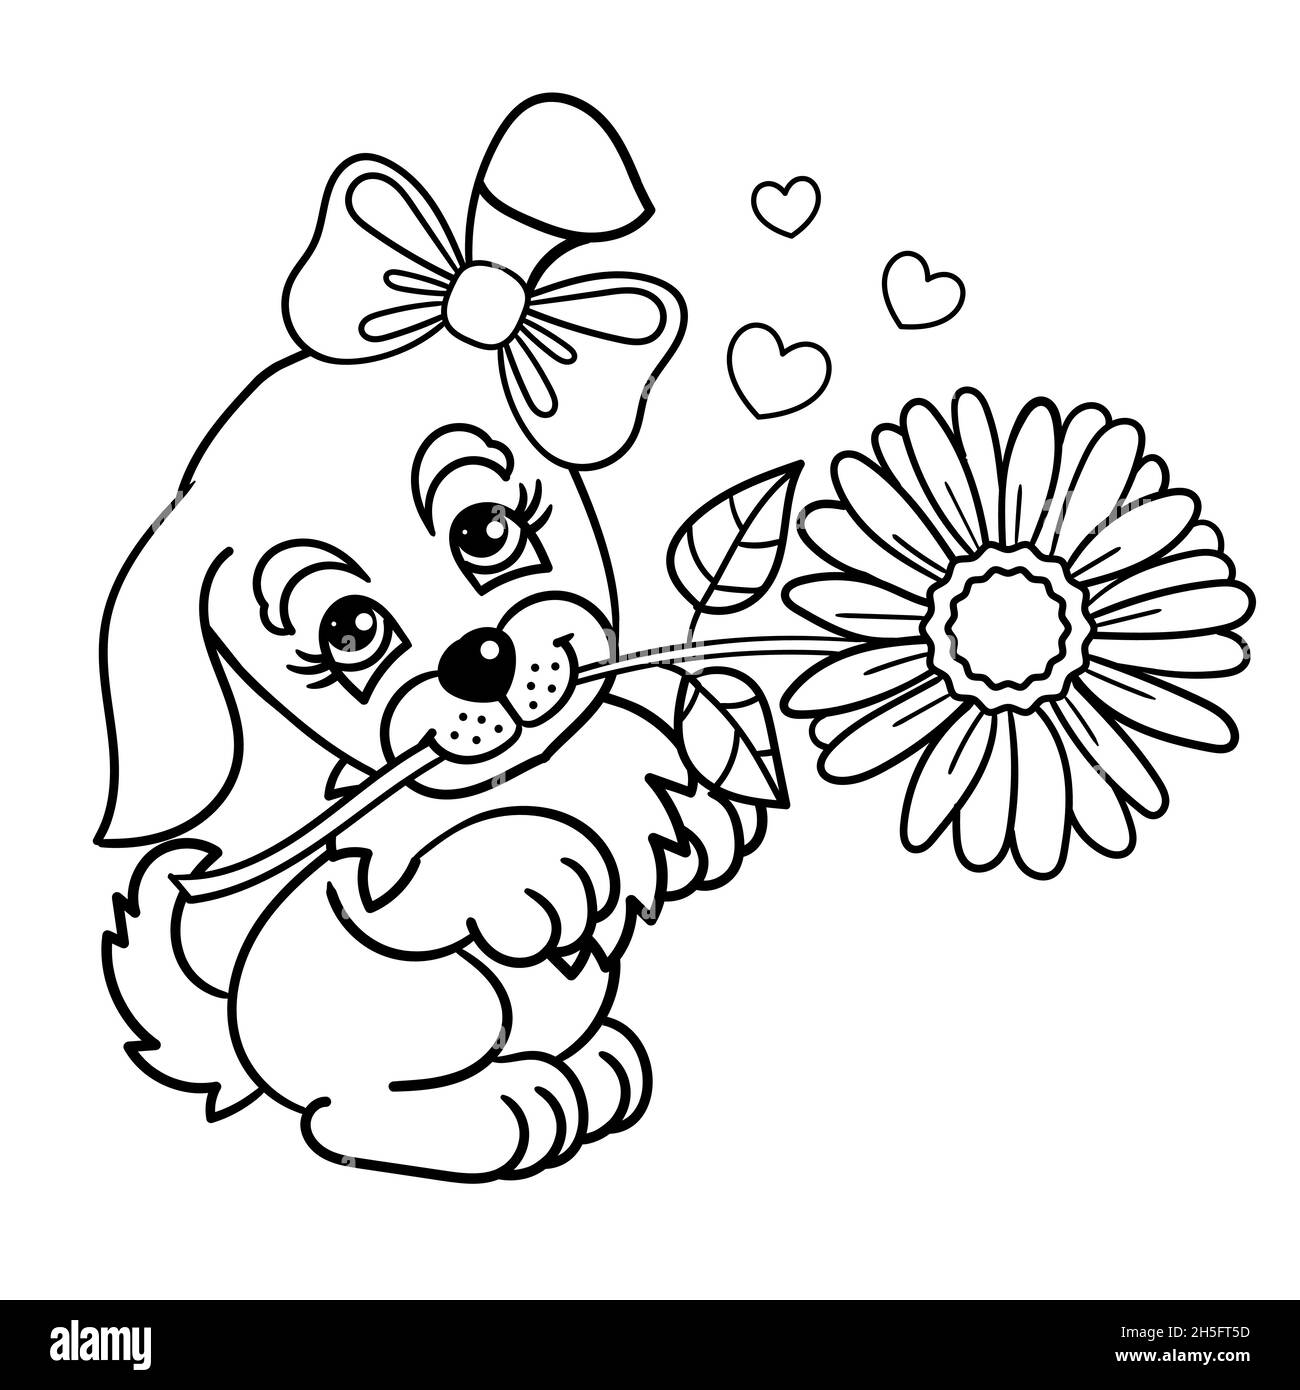 Cute dog cartoon hand drawn vector illustration. Can be used for t-shirt print, kids wear fashion design, baby shower invitation card. Stock Vector